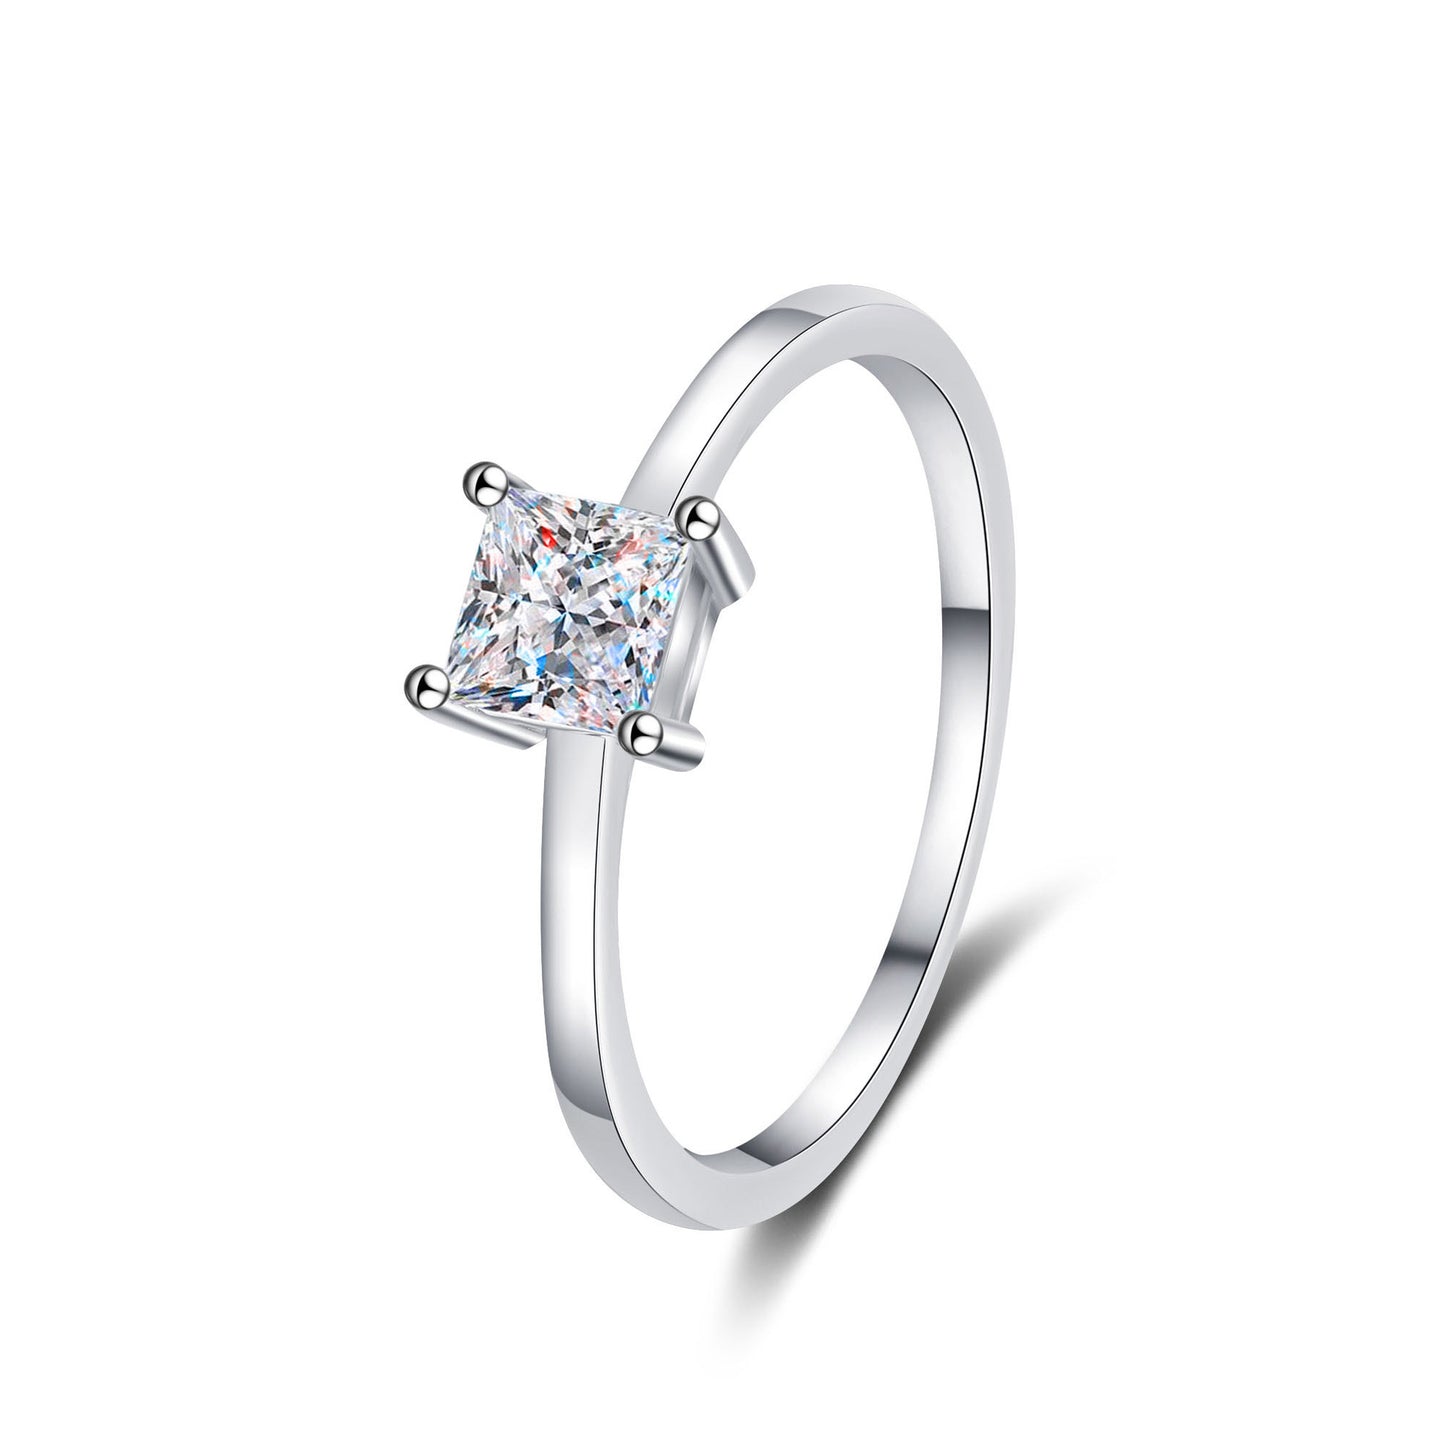 Princess style S925 sterling silver moissanite ring #MR00040